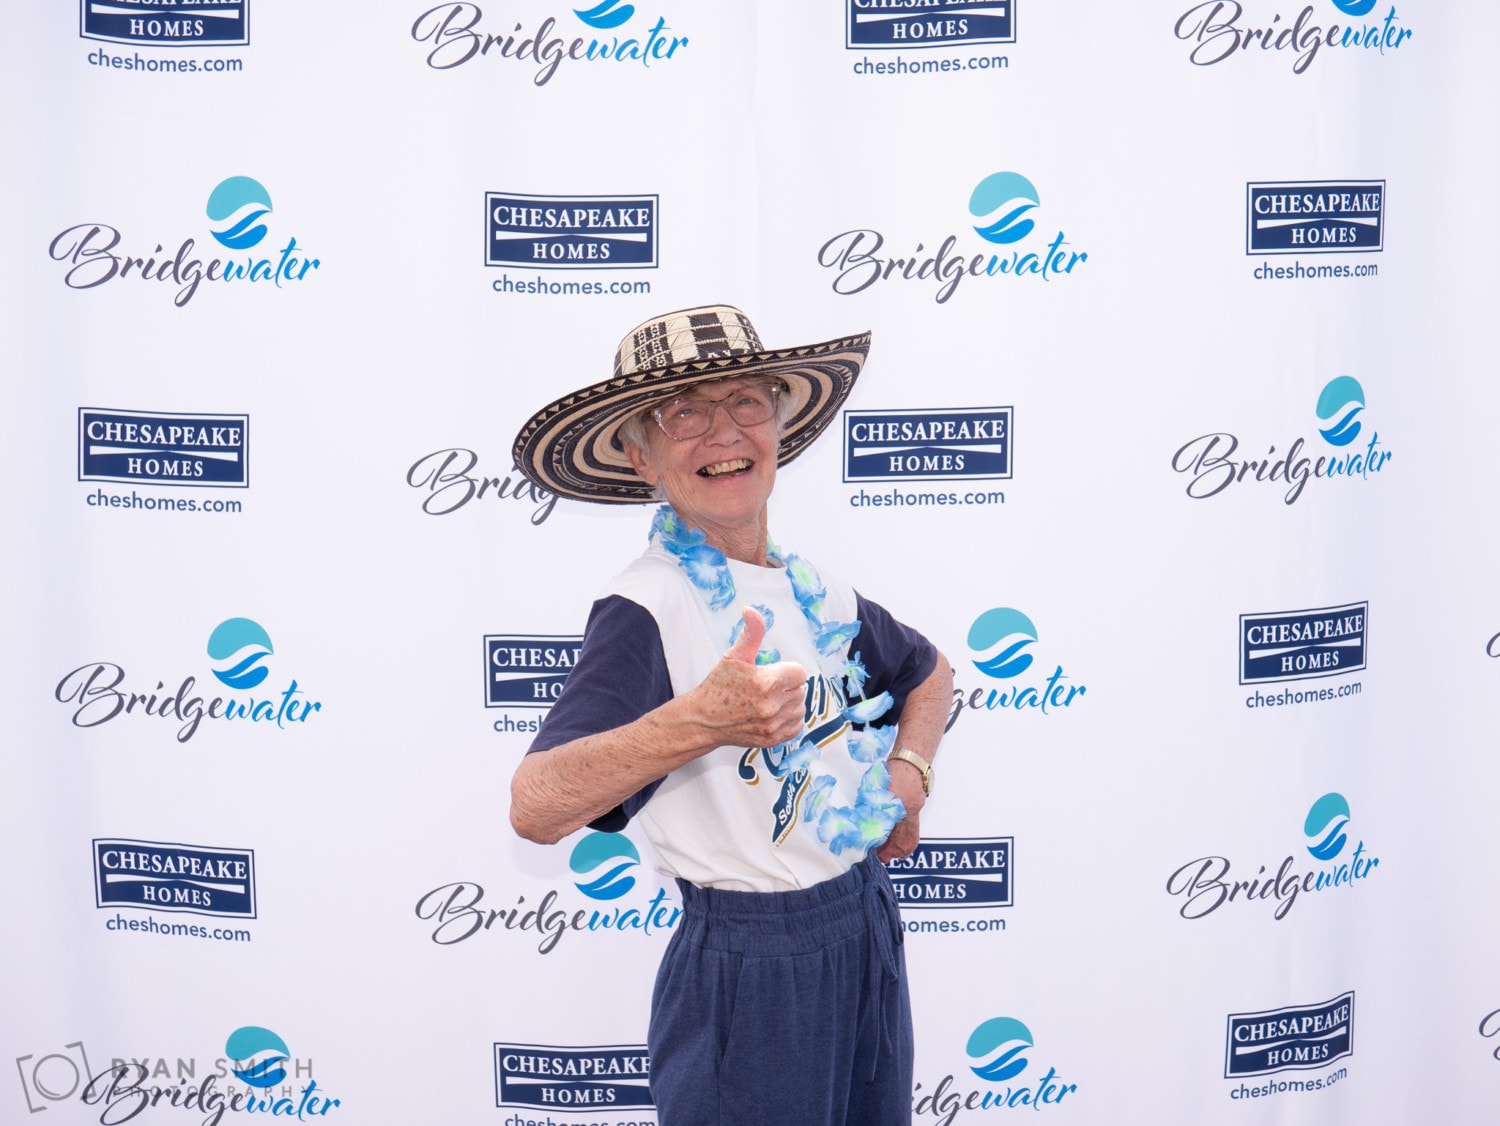 Photo Booth corporate event for Bridgewater Homes -